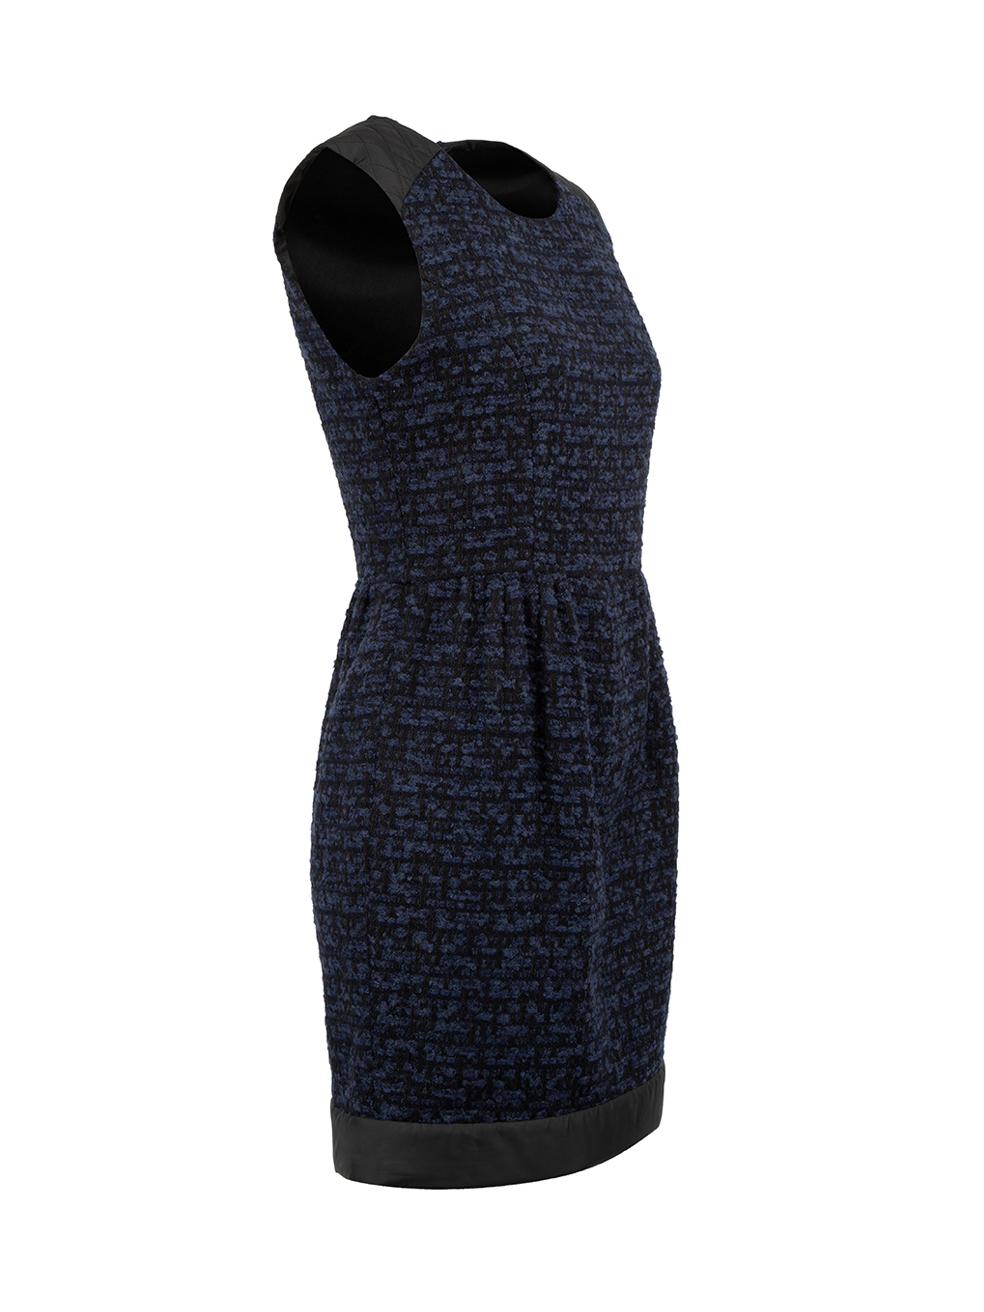 CONDITION is Very good. Hardly any visible wear to dress is evident on this used Sandro designer resale item.

Details
Blue
Tweed
Mini dress
Quilted panel on shoulder
Round neckline
Back zip closure
Made in Poland 

Composition
60% Acrylic, 37% Wool